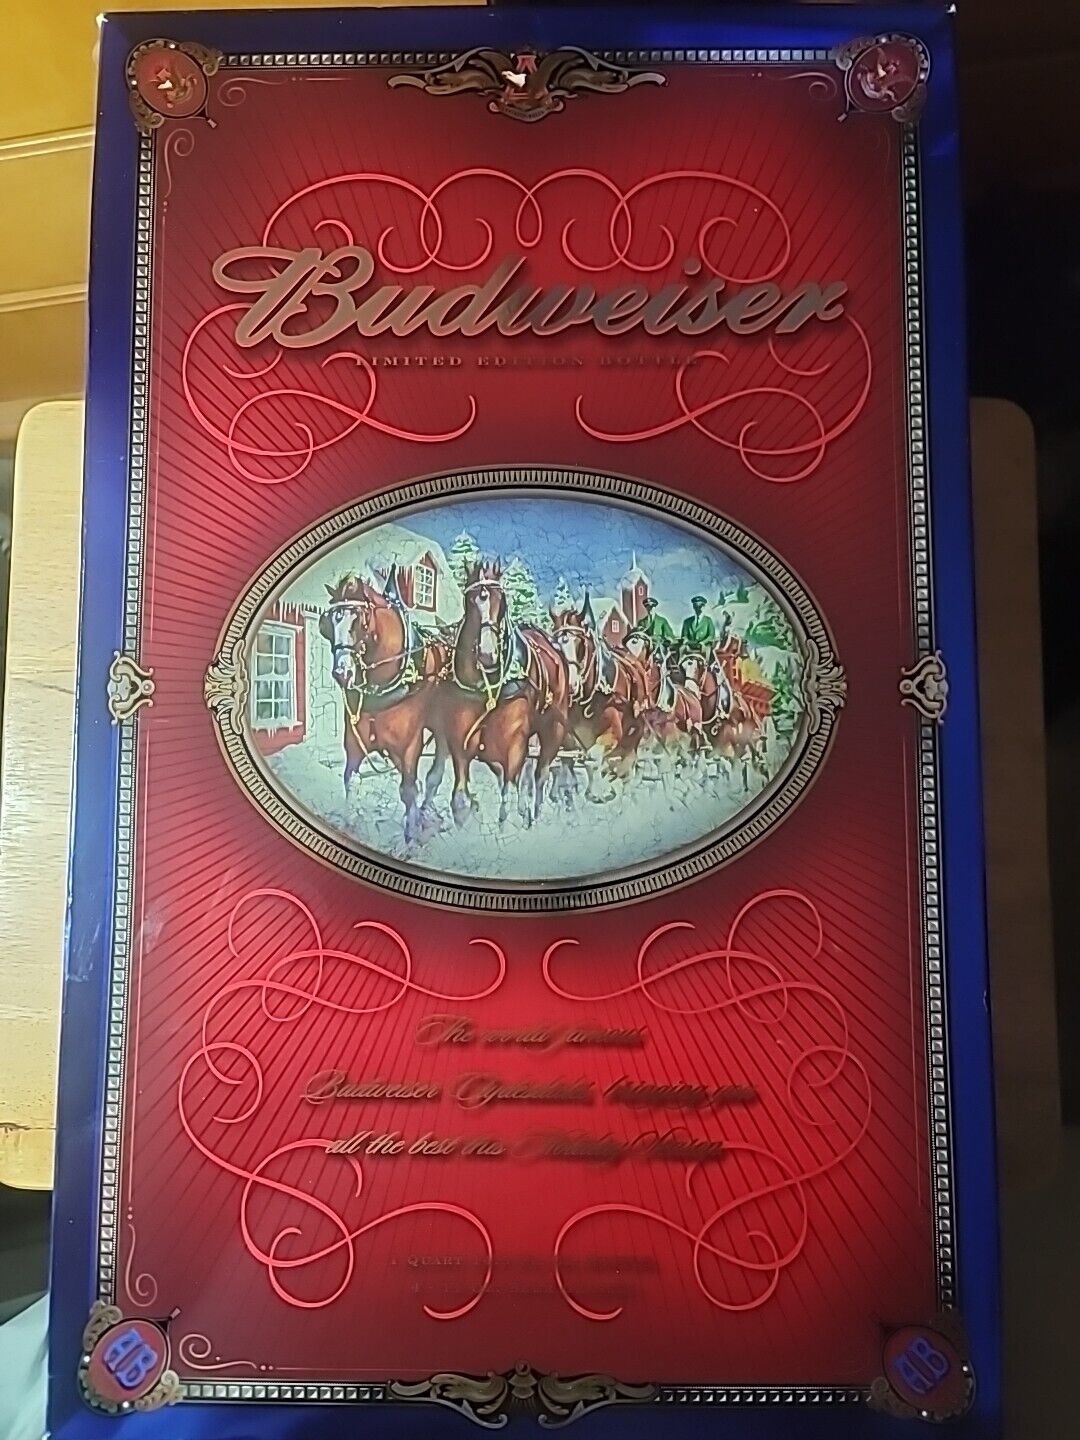 2000 Budweiser Millennium Limited Edition Bottle Four Glasses & Cover Box Sealed